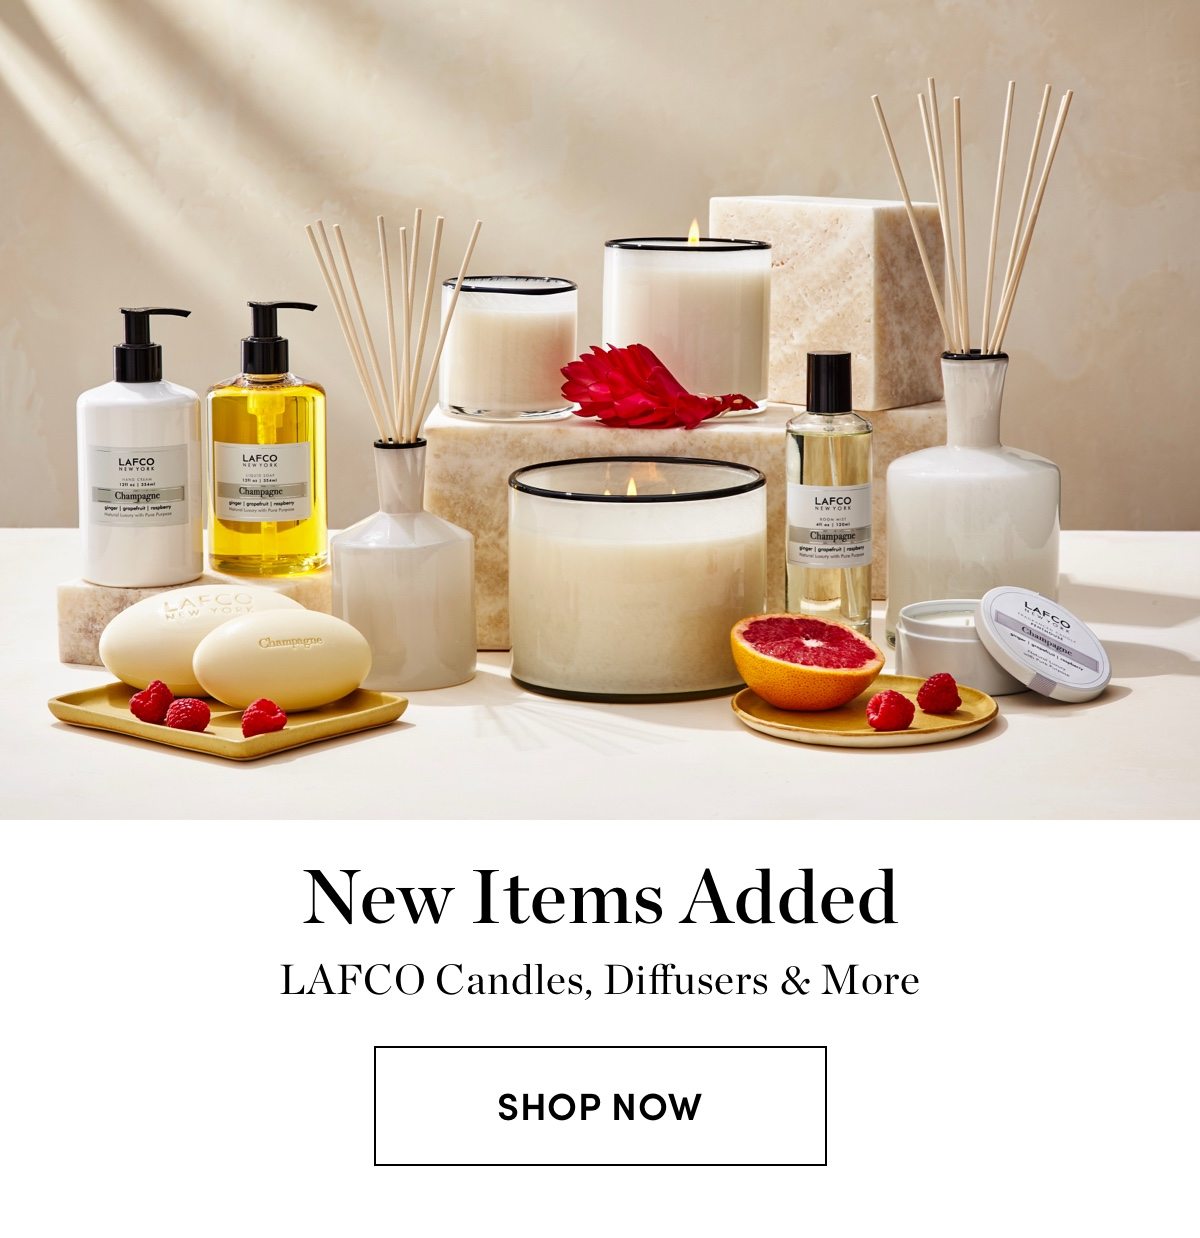 LAFCO Candles, Diffusers & More